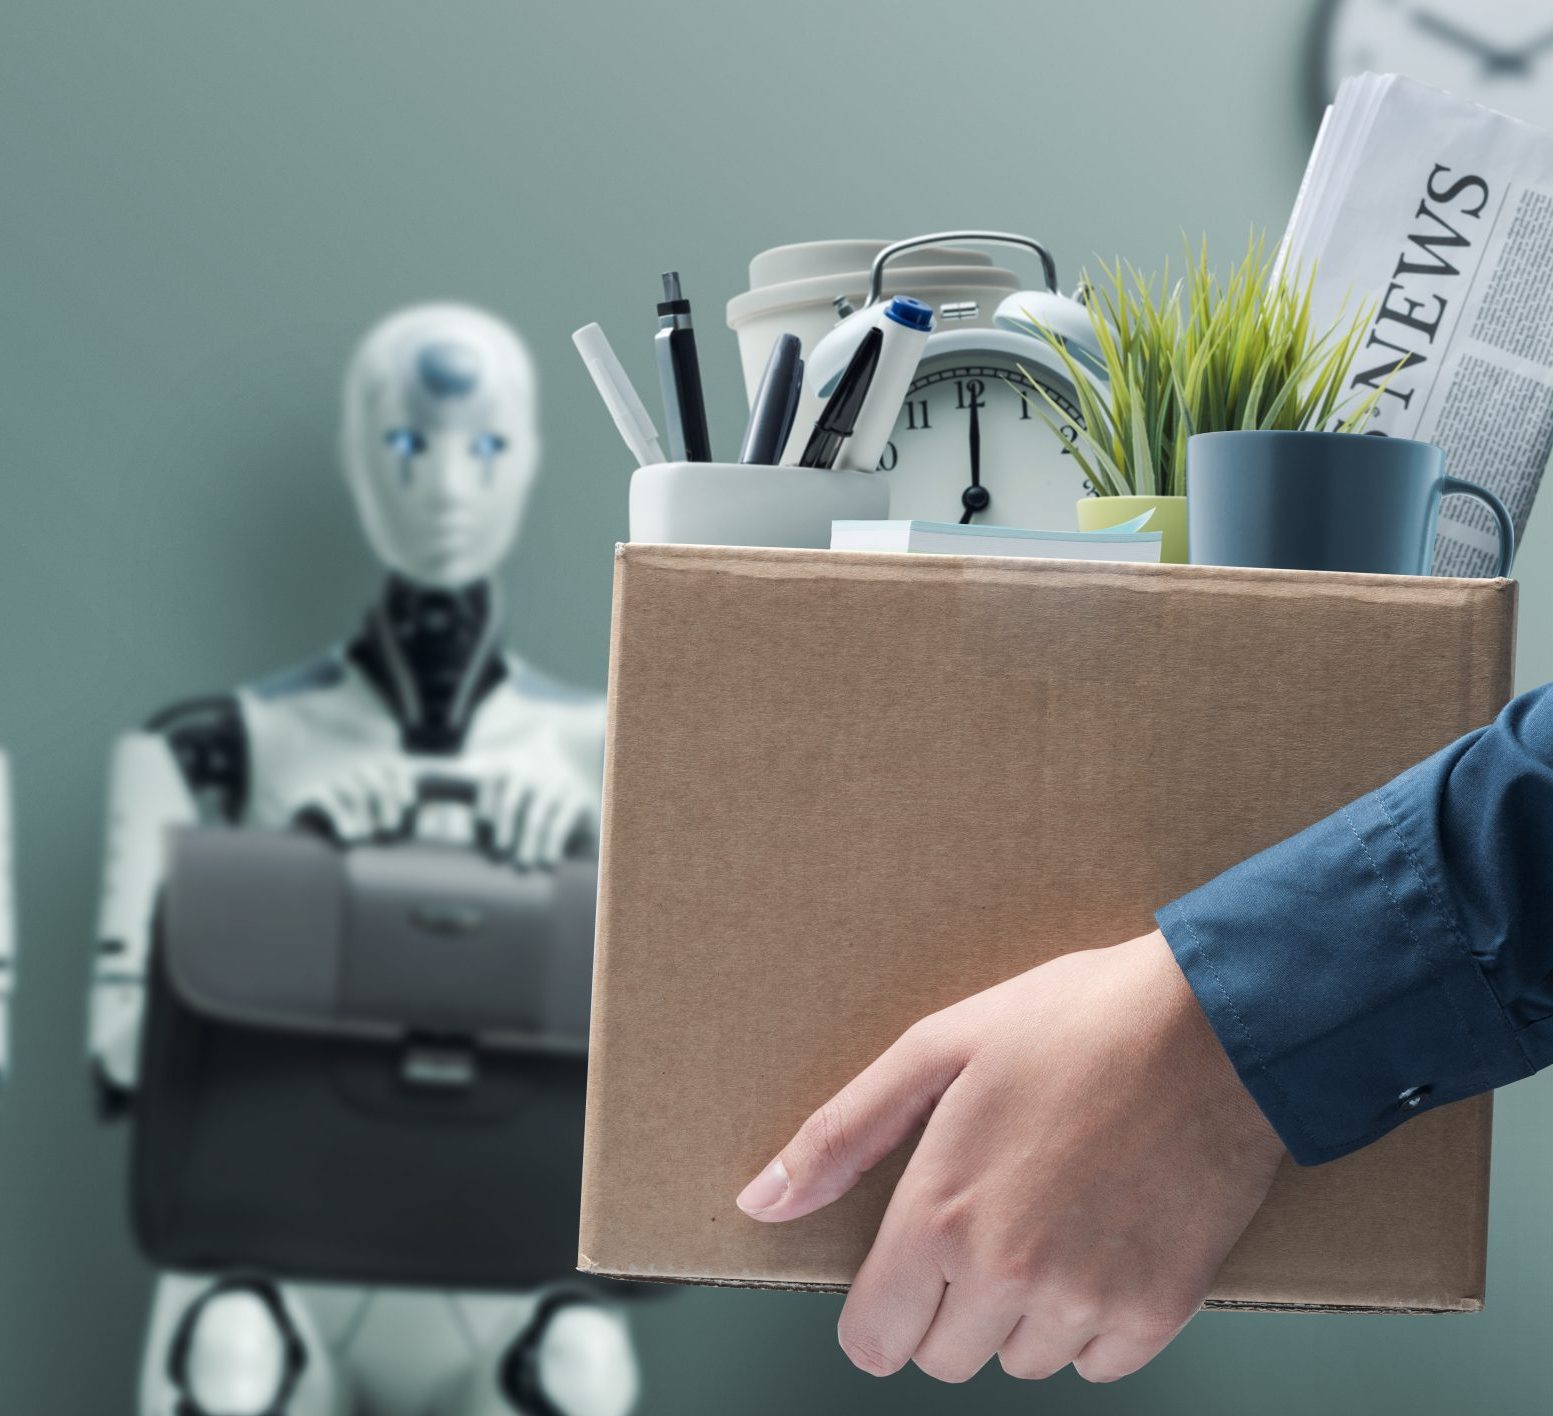 Does artificial intelligence technology replace human jobs?